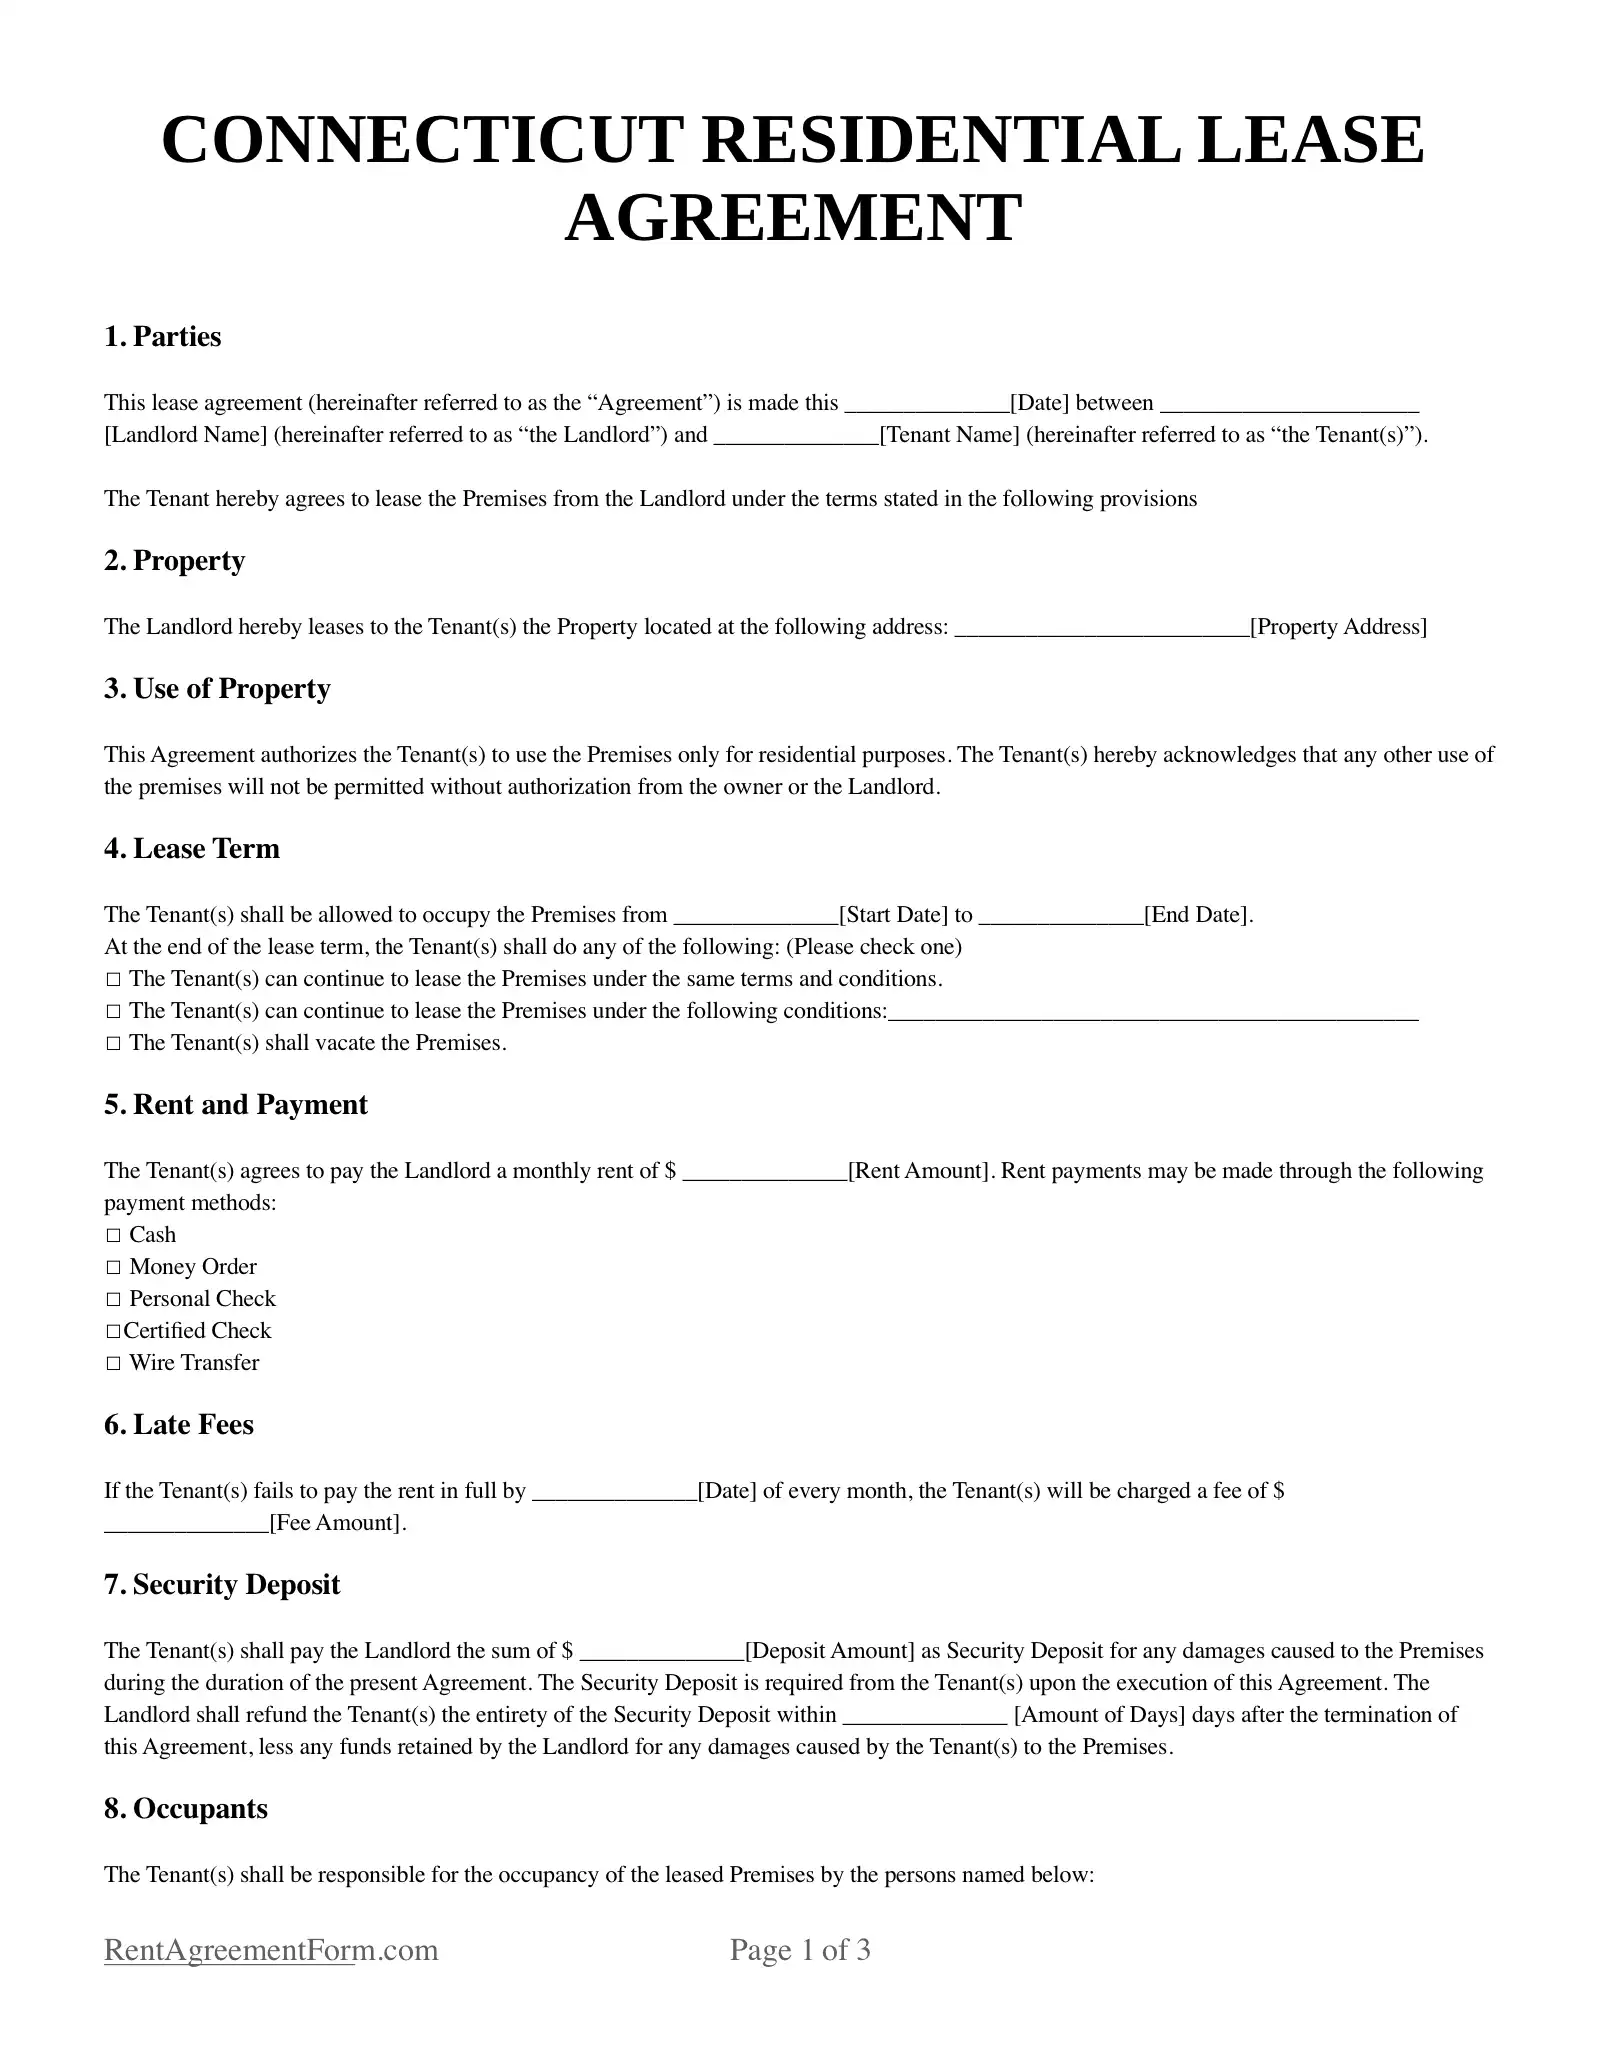 Connecticut Residential Lease Agreement Sample